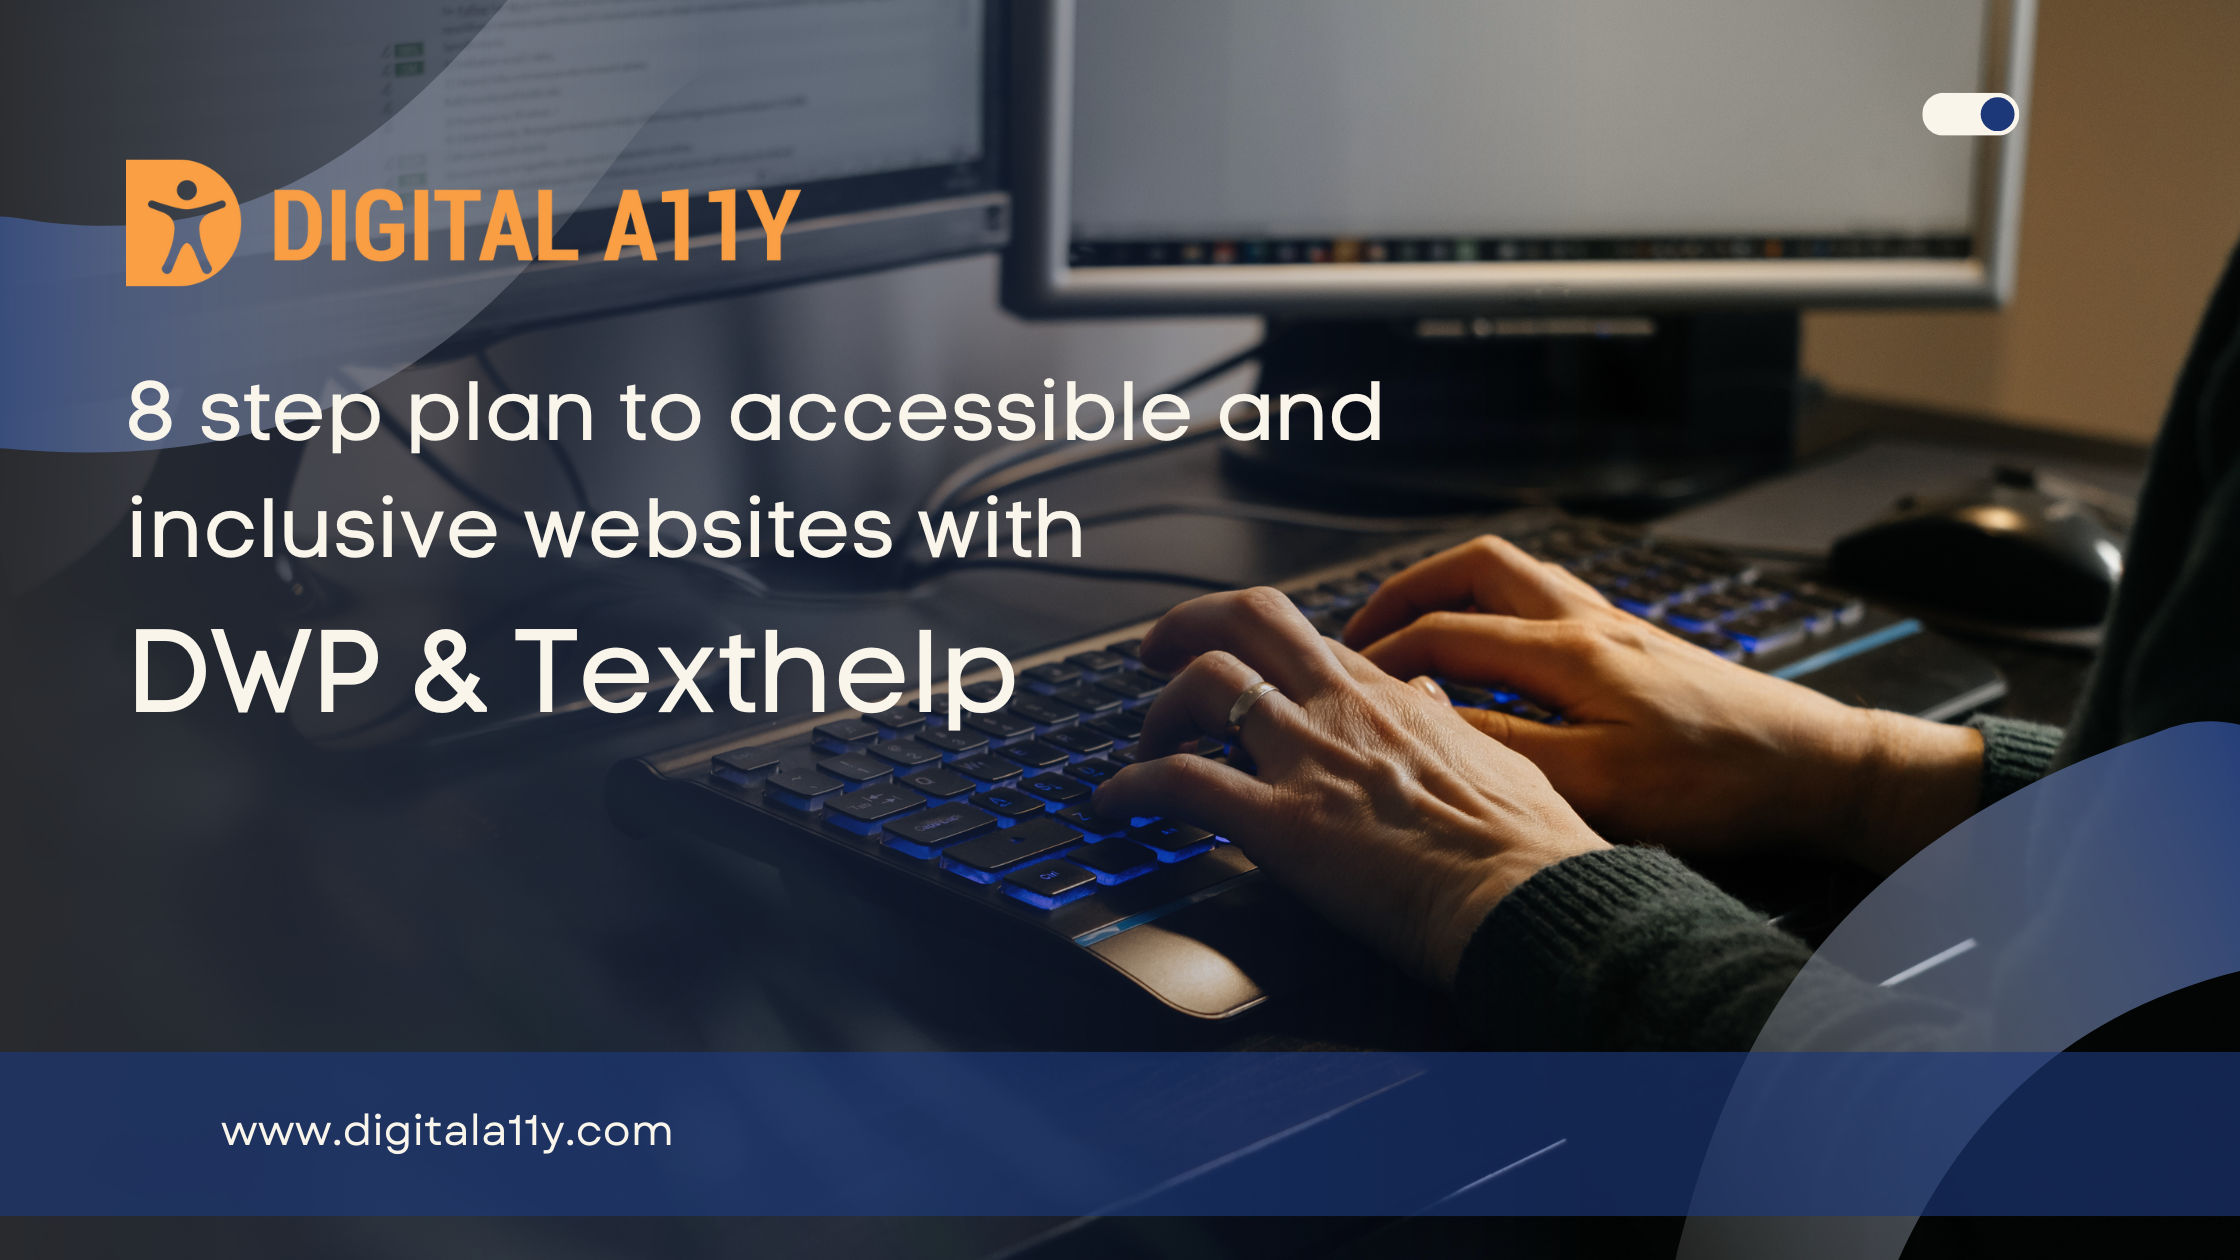 8 step plan to accessible and inclusive websites with DWP & Texthelp